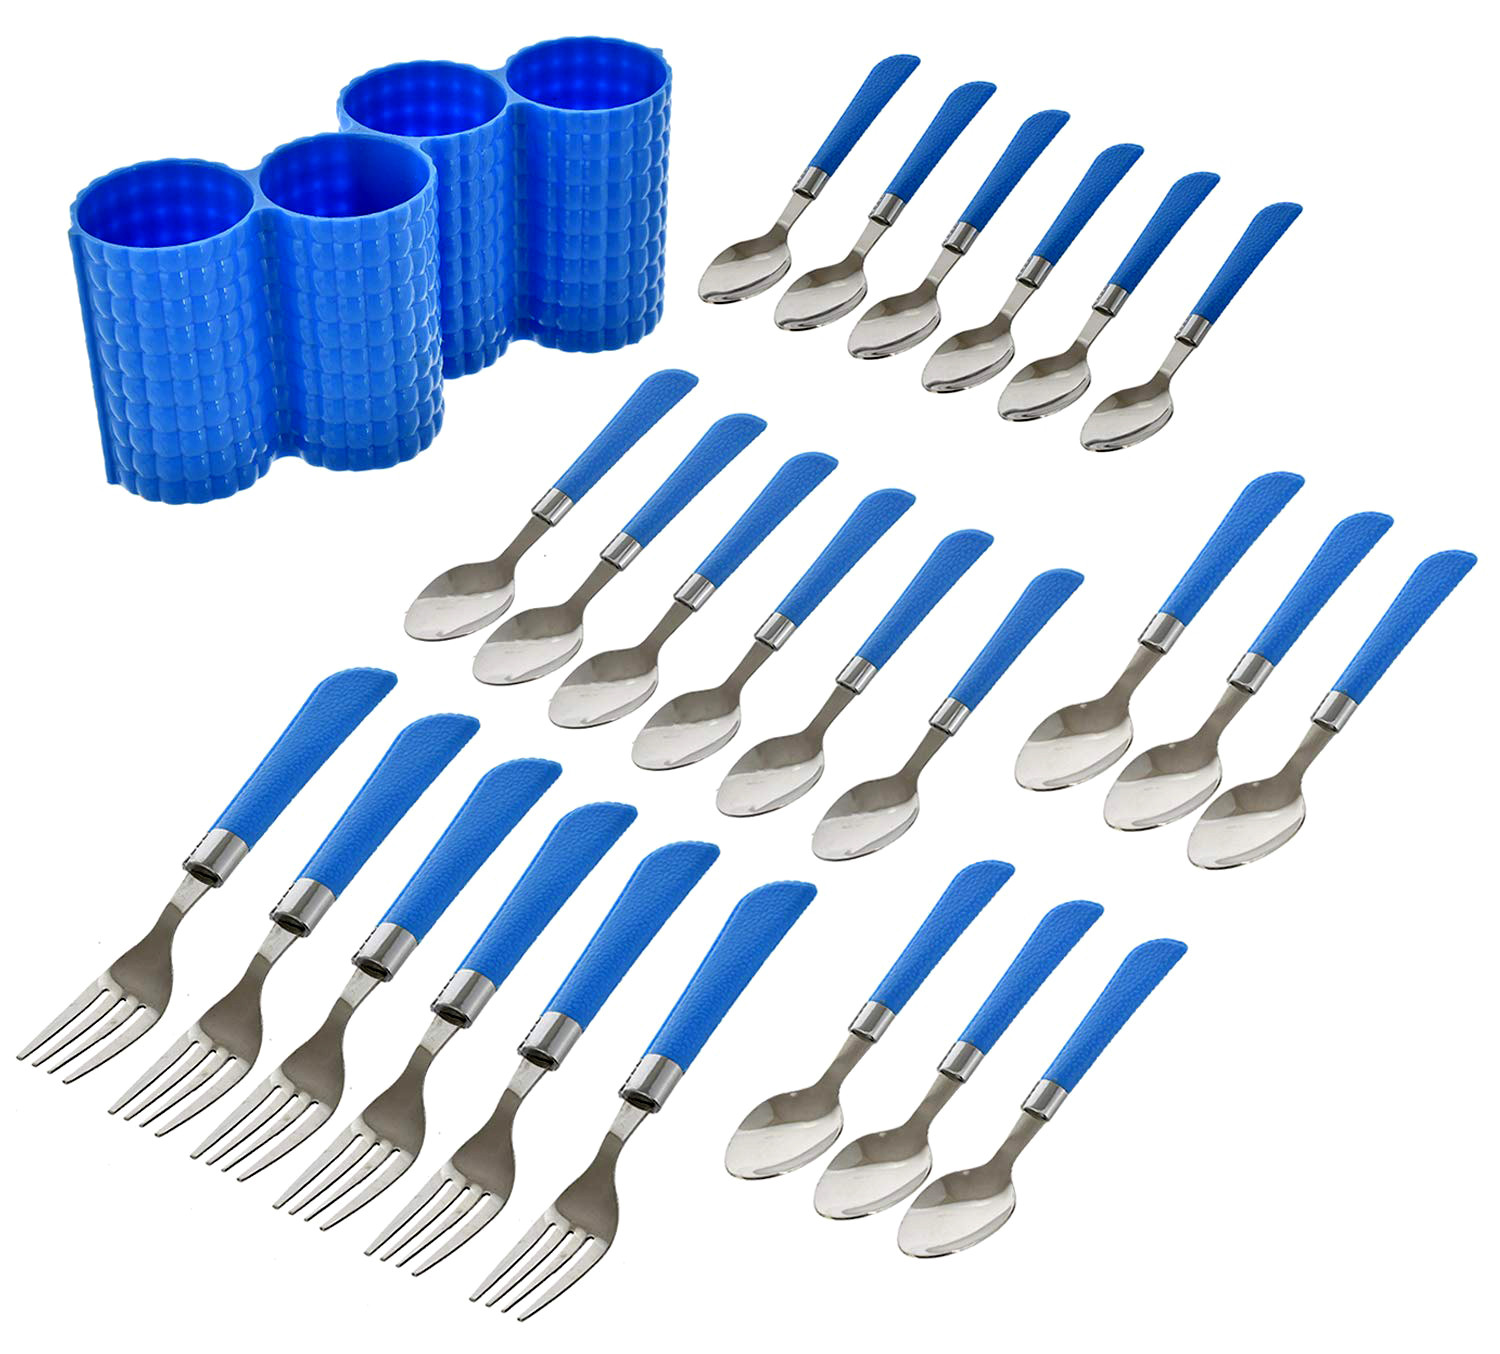 Kuber Industries Premium ABS Plastic & Stainless Steel Cutlery Set With Stand For Kitchen/Dining, Set of 24 (Blue)